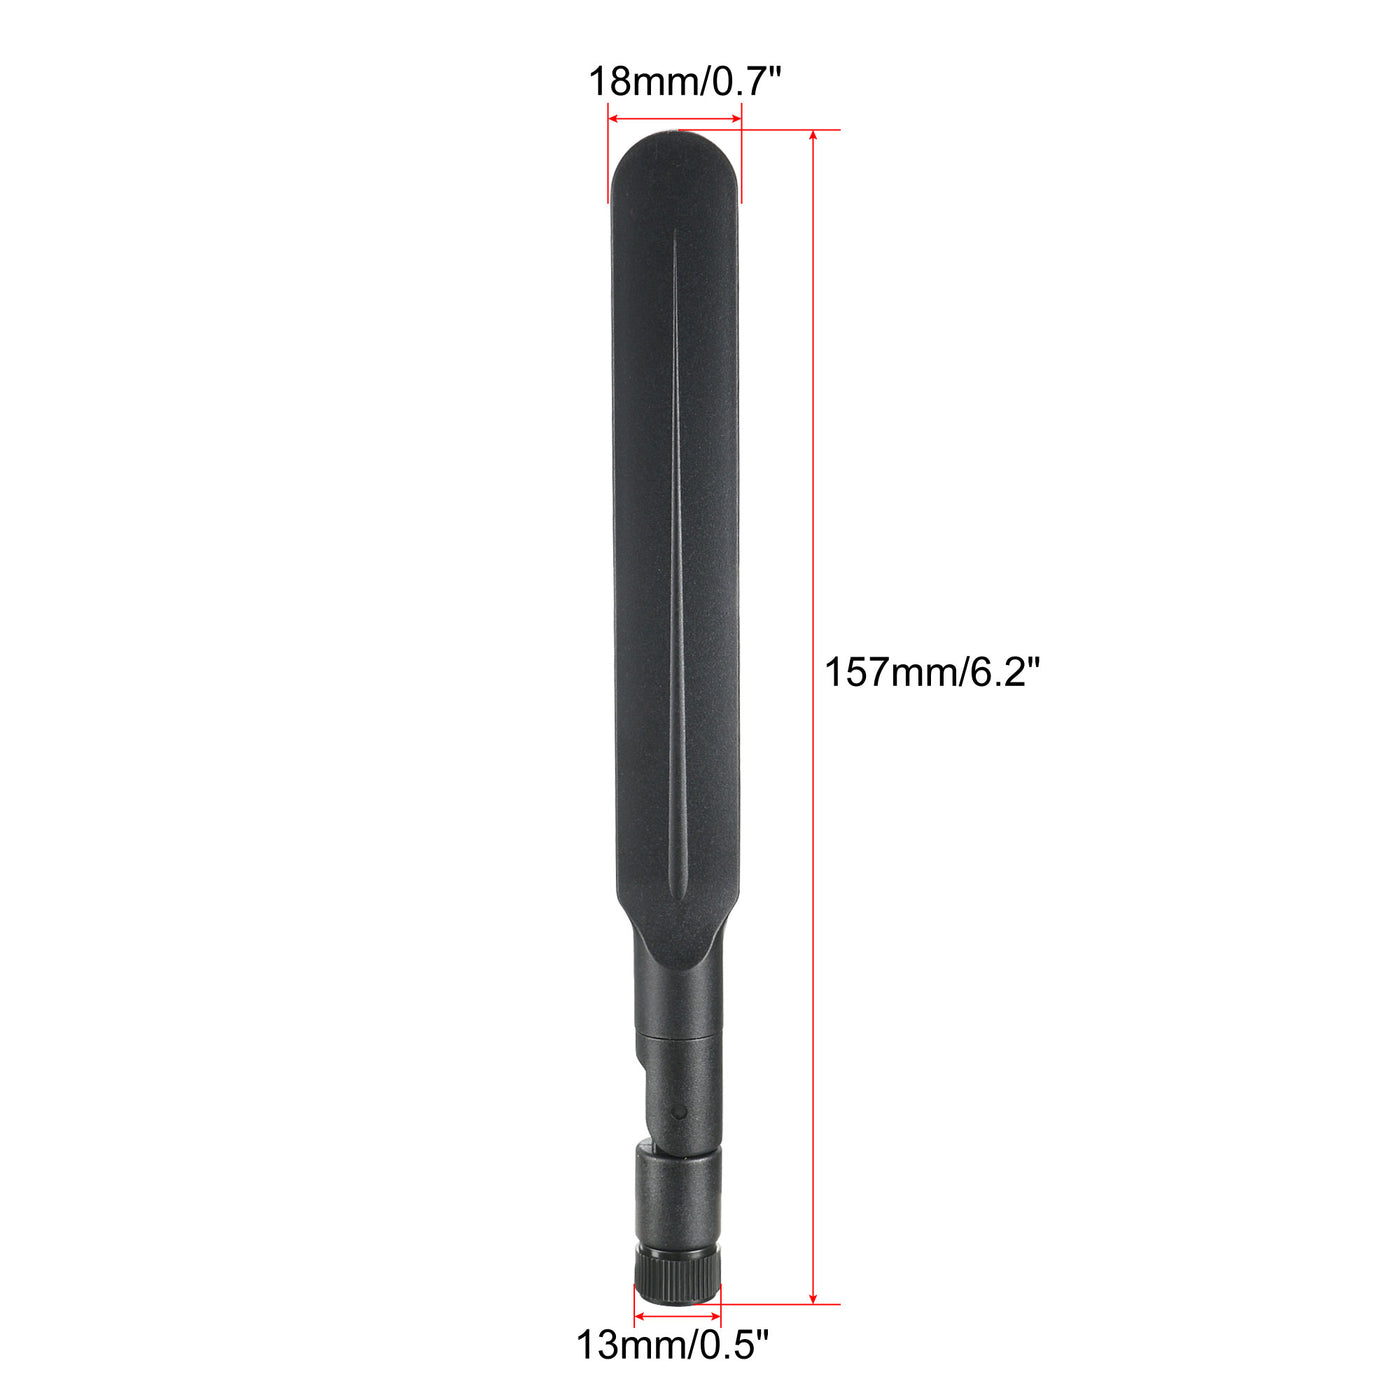 uxcell Uxcell GSM LTE Antenna 3G 4G 9dBi High Gain 780-960/1710-2700MHz SMA Male Connector Direction Foldable Paddle Type